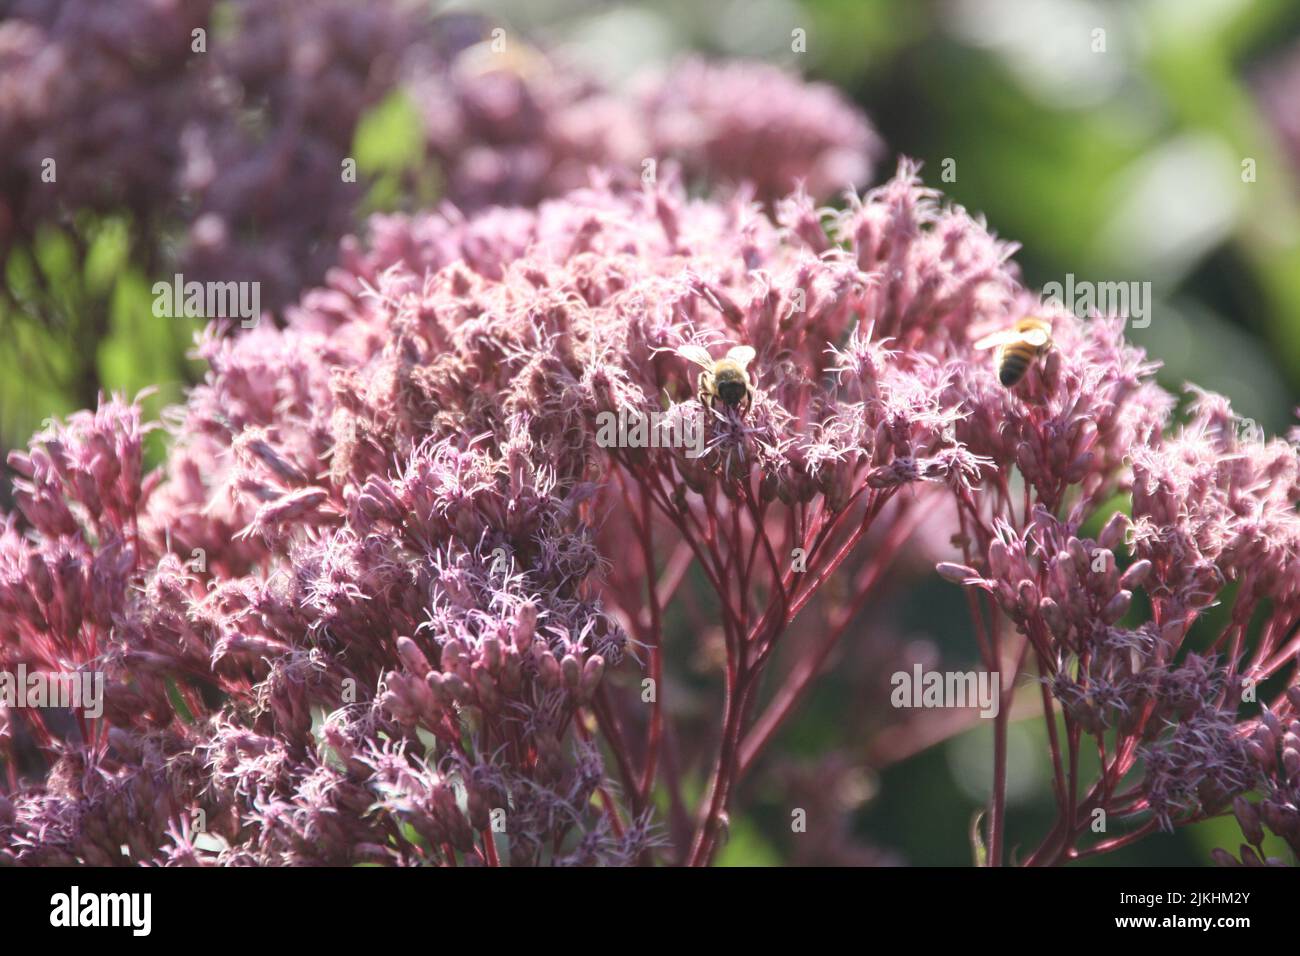 A scenic view of bees perched on pink sweet-scented joe pye weed flowers in a blurred background Stock Photo